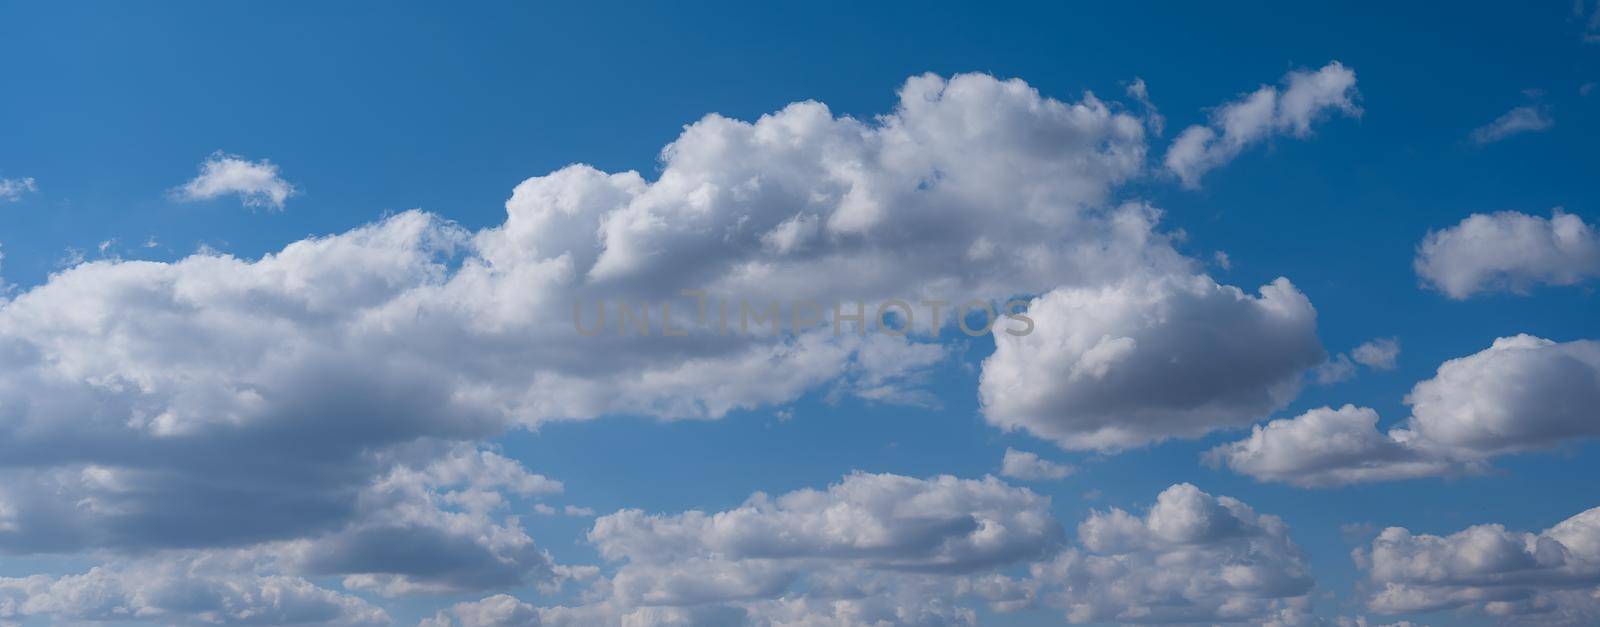 Cumulus clouds against the blue sky on a summer day. Widescreen. by mrwed54